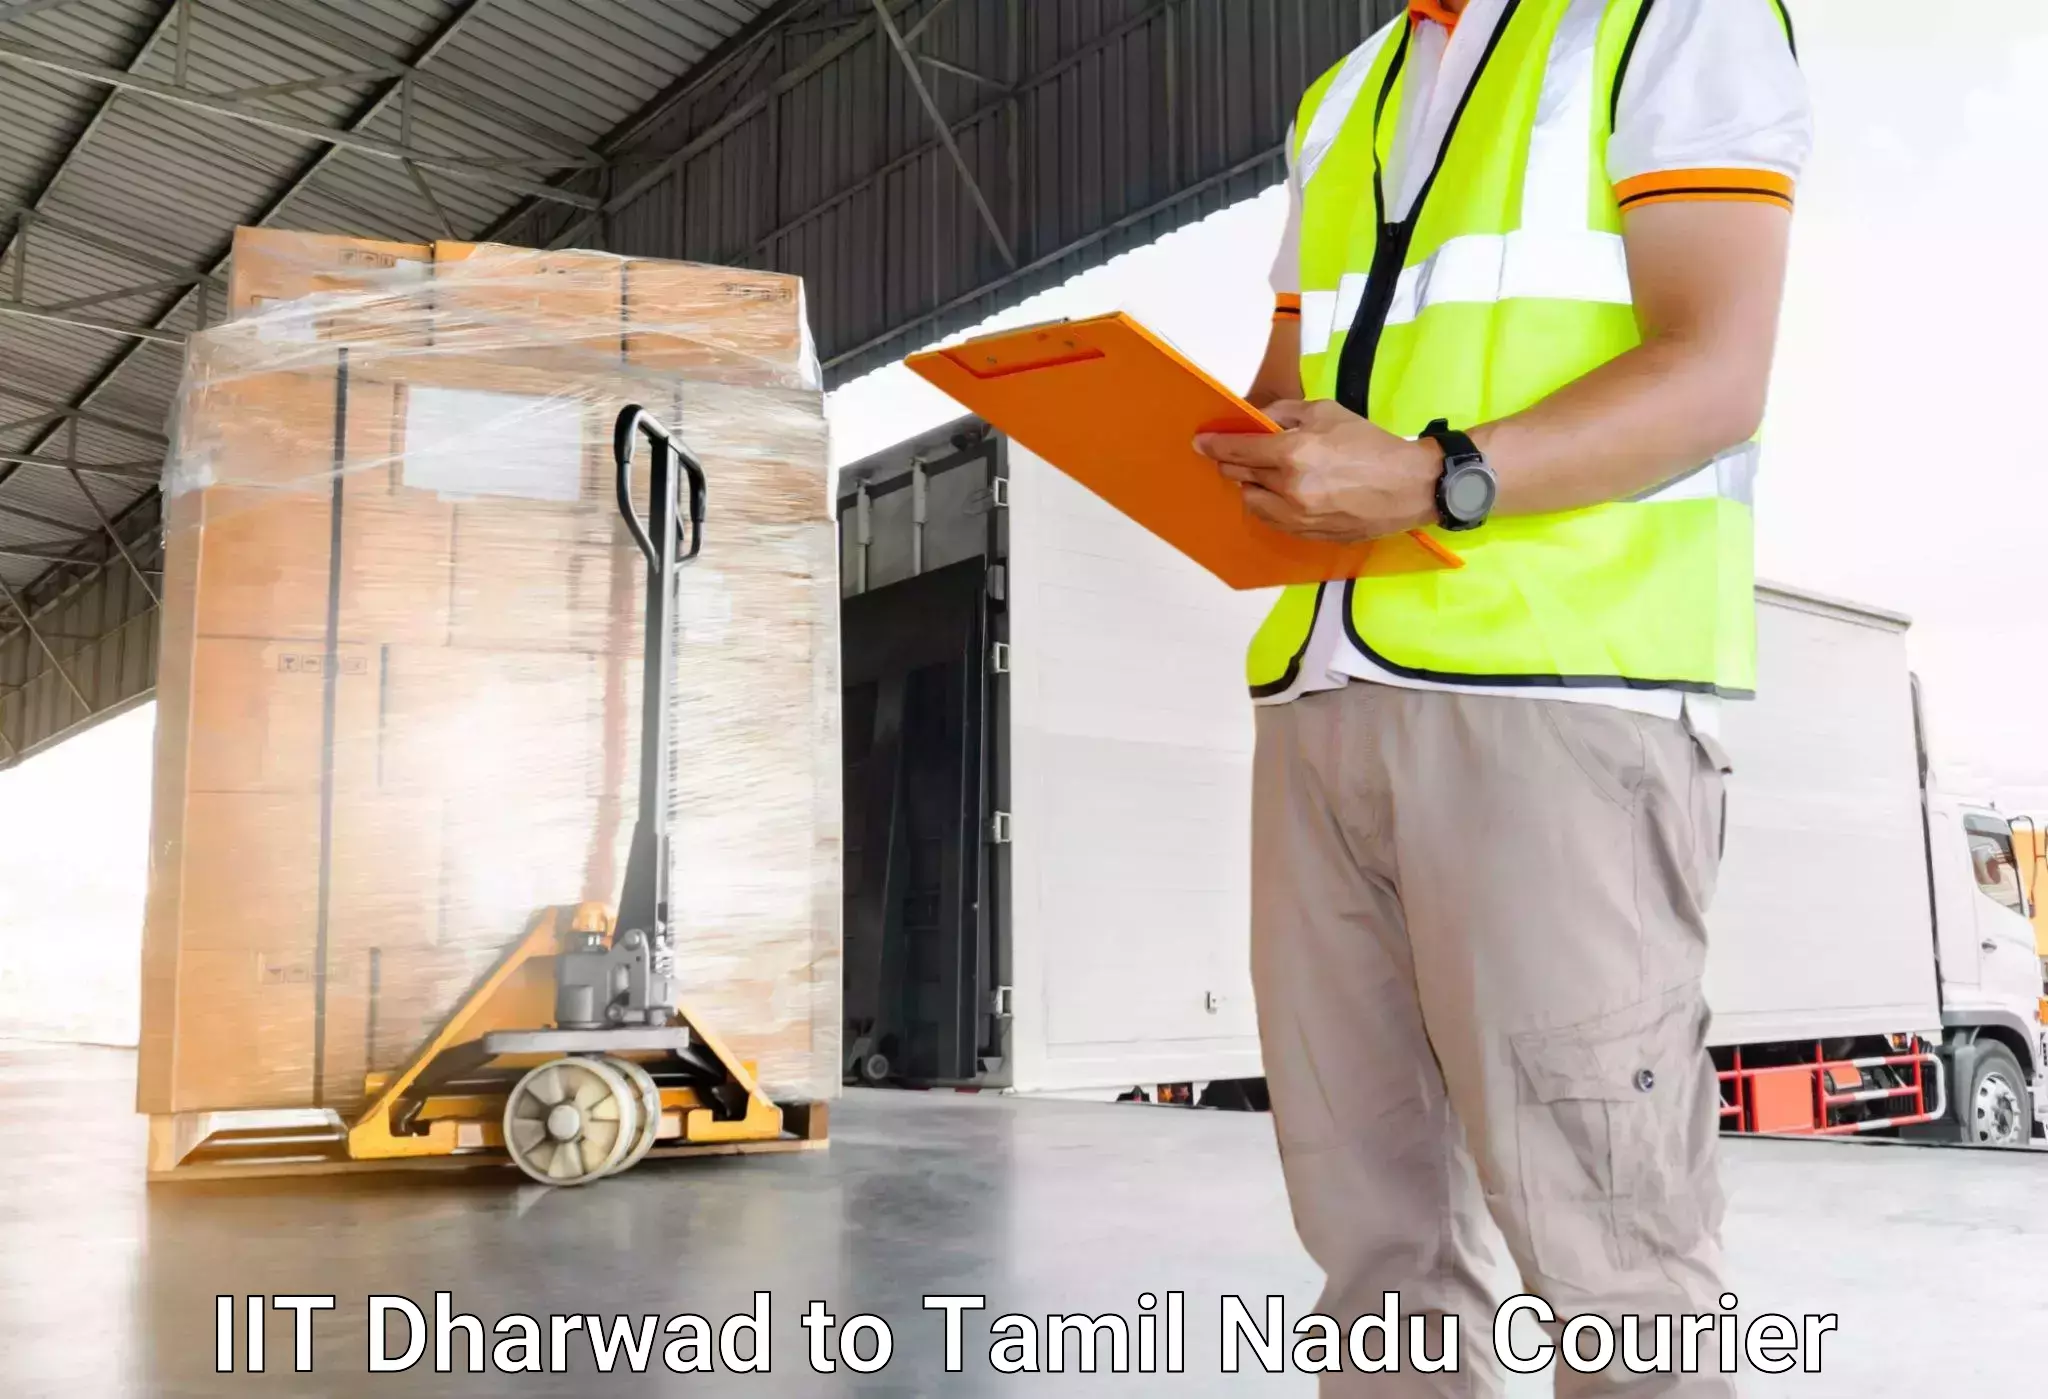 Express luggage delivery in IIT Dharwad to SRM Institute of Science and Technology Chennai